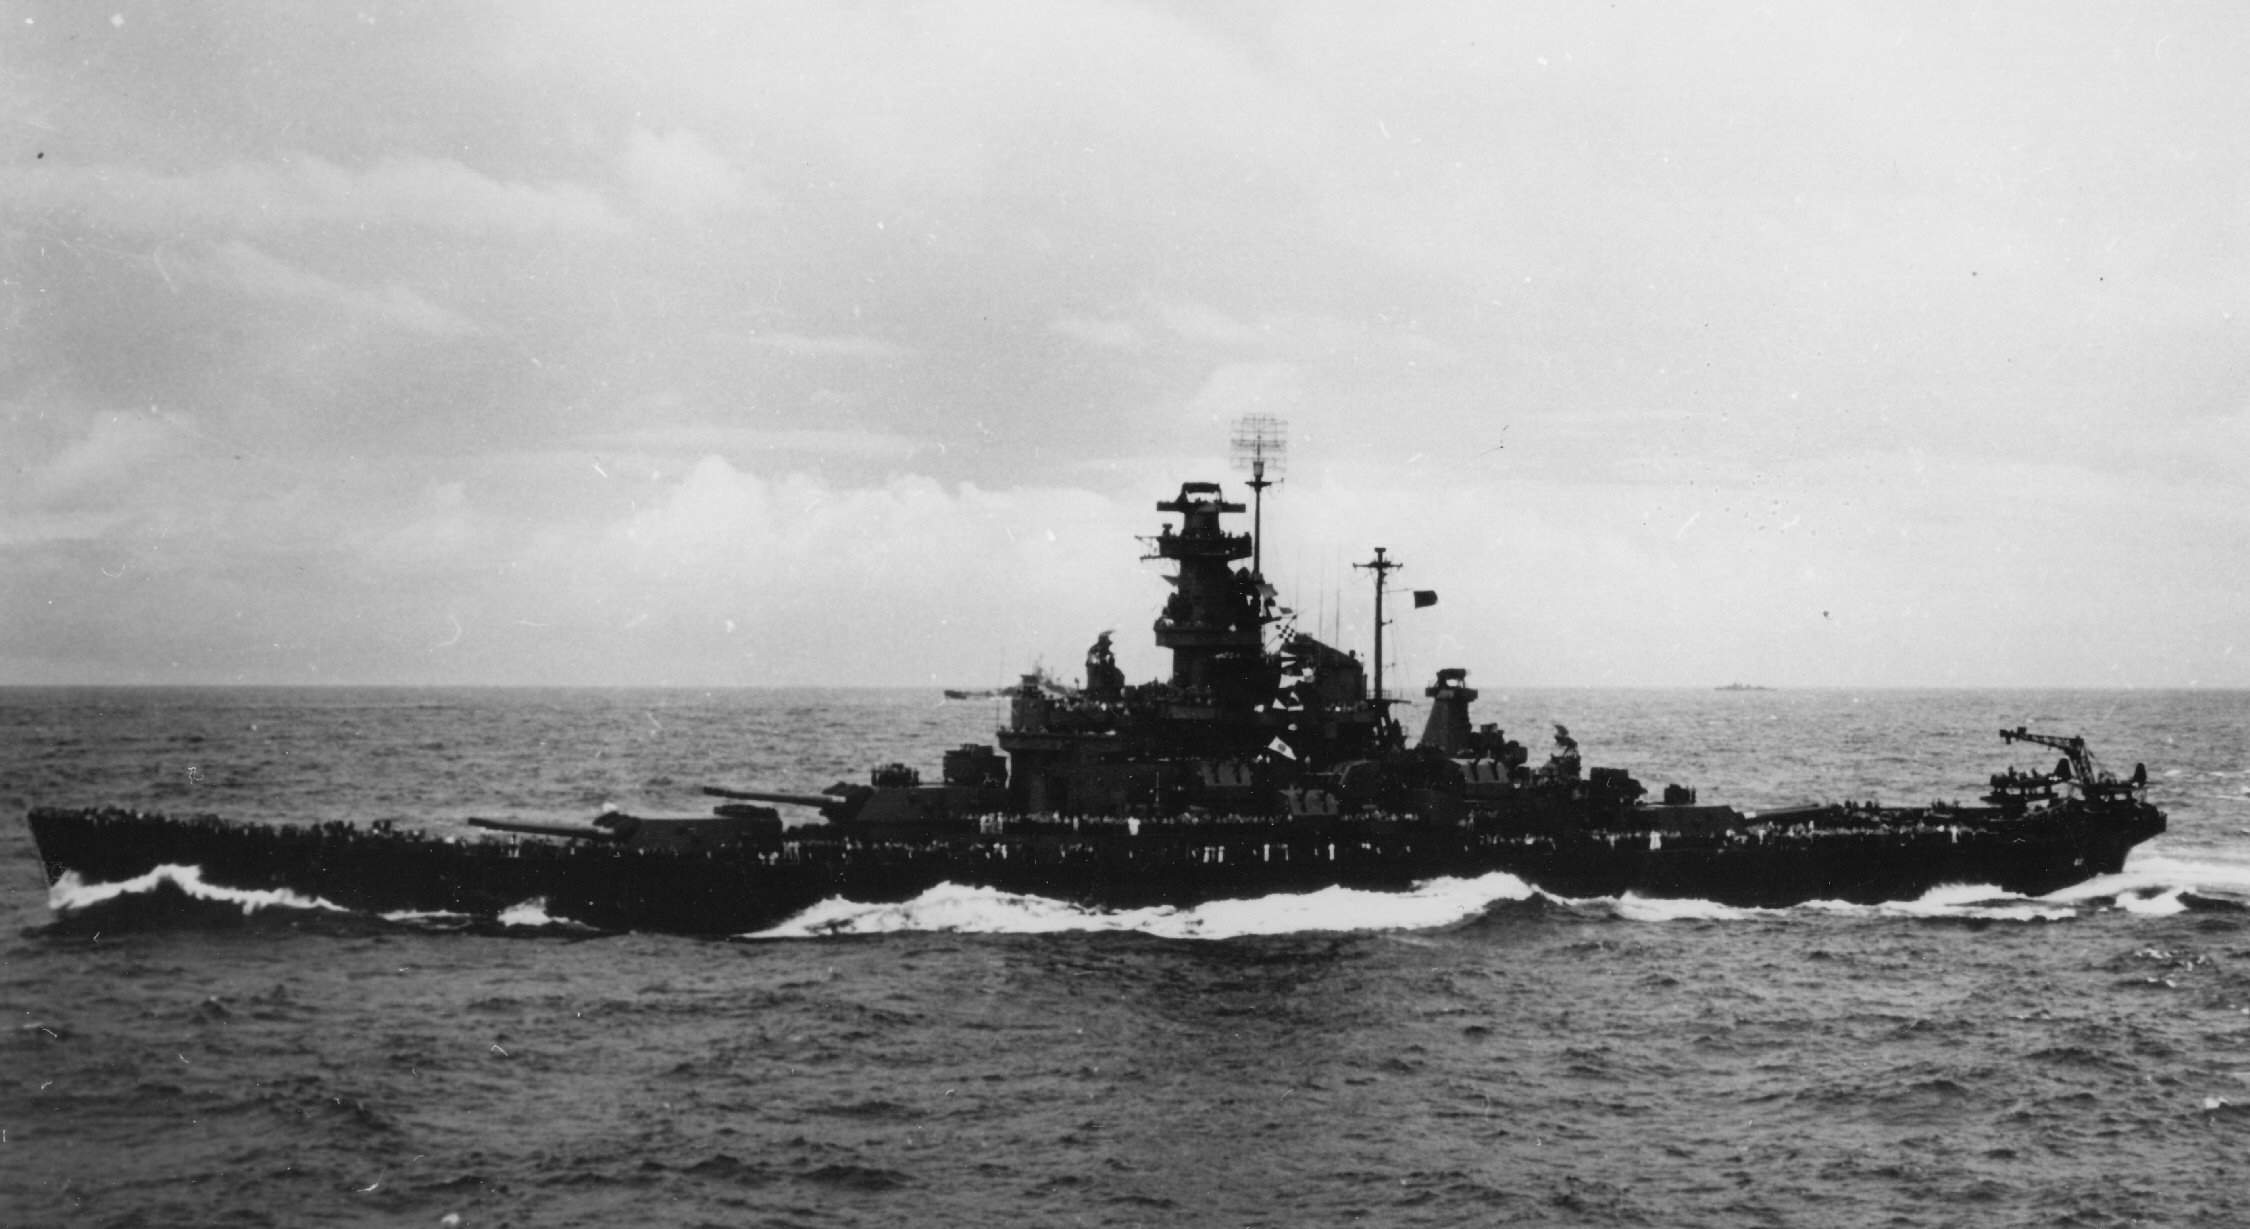 USS Alabama en route to Gilbert islands, 12 Nov 1943; note USS Indiana in distance and another ship in background; photo taken from USS Monterey